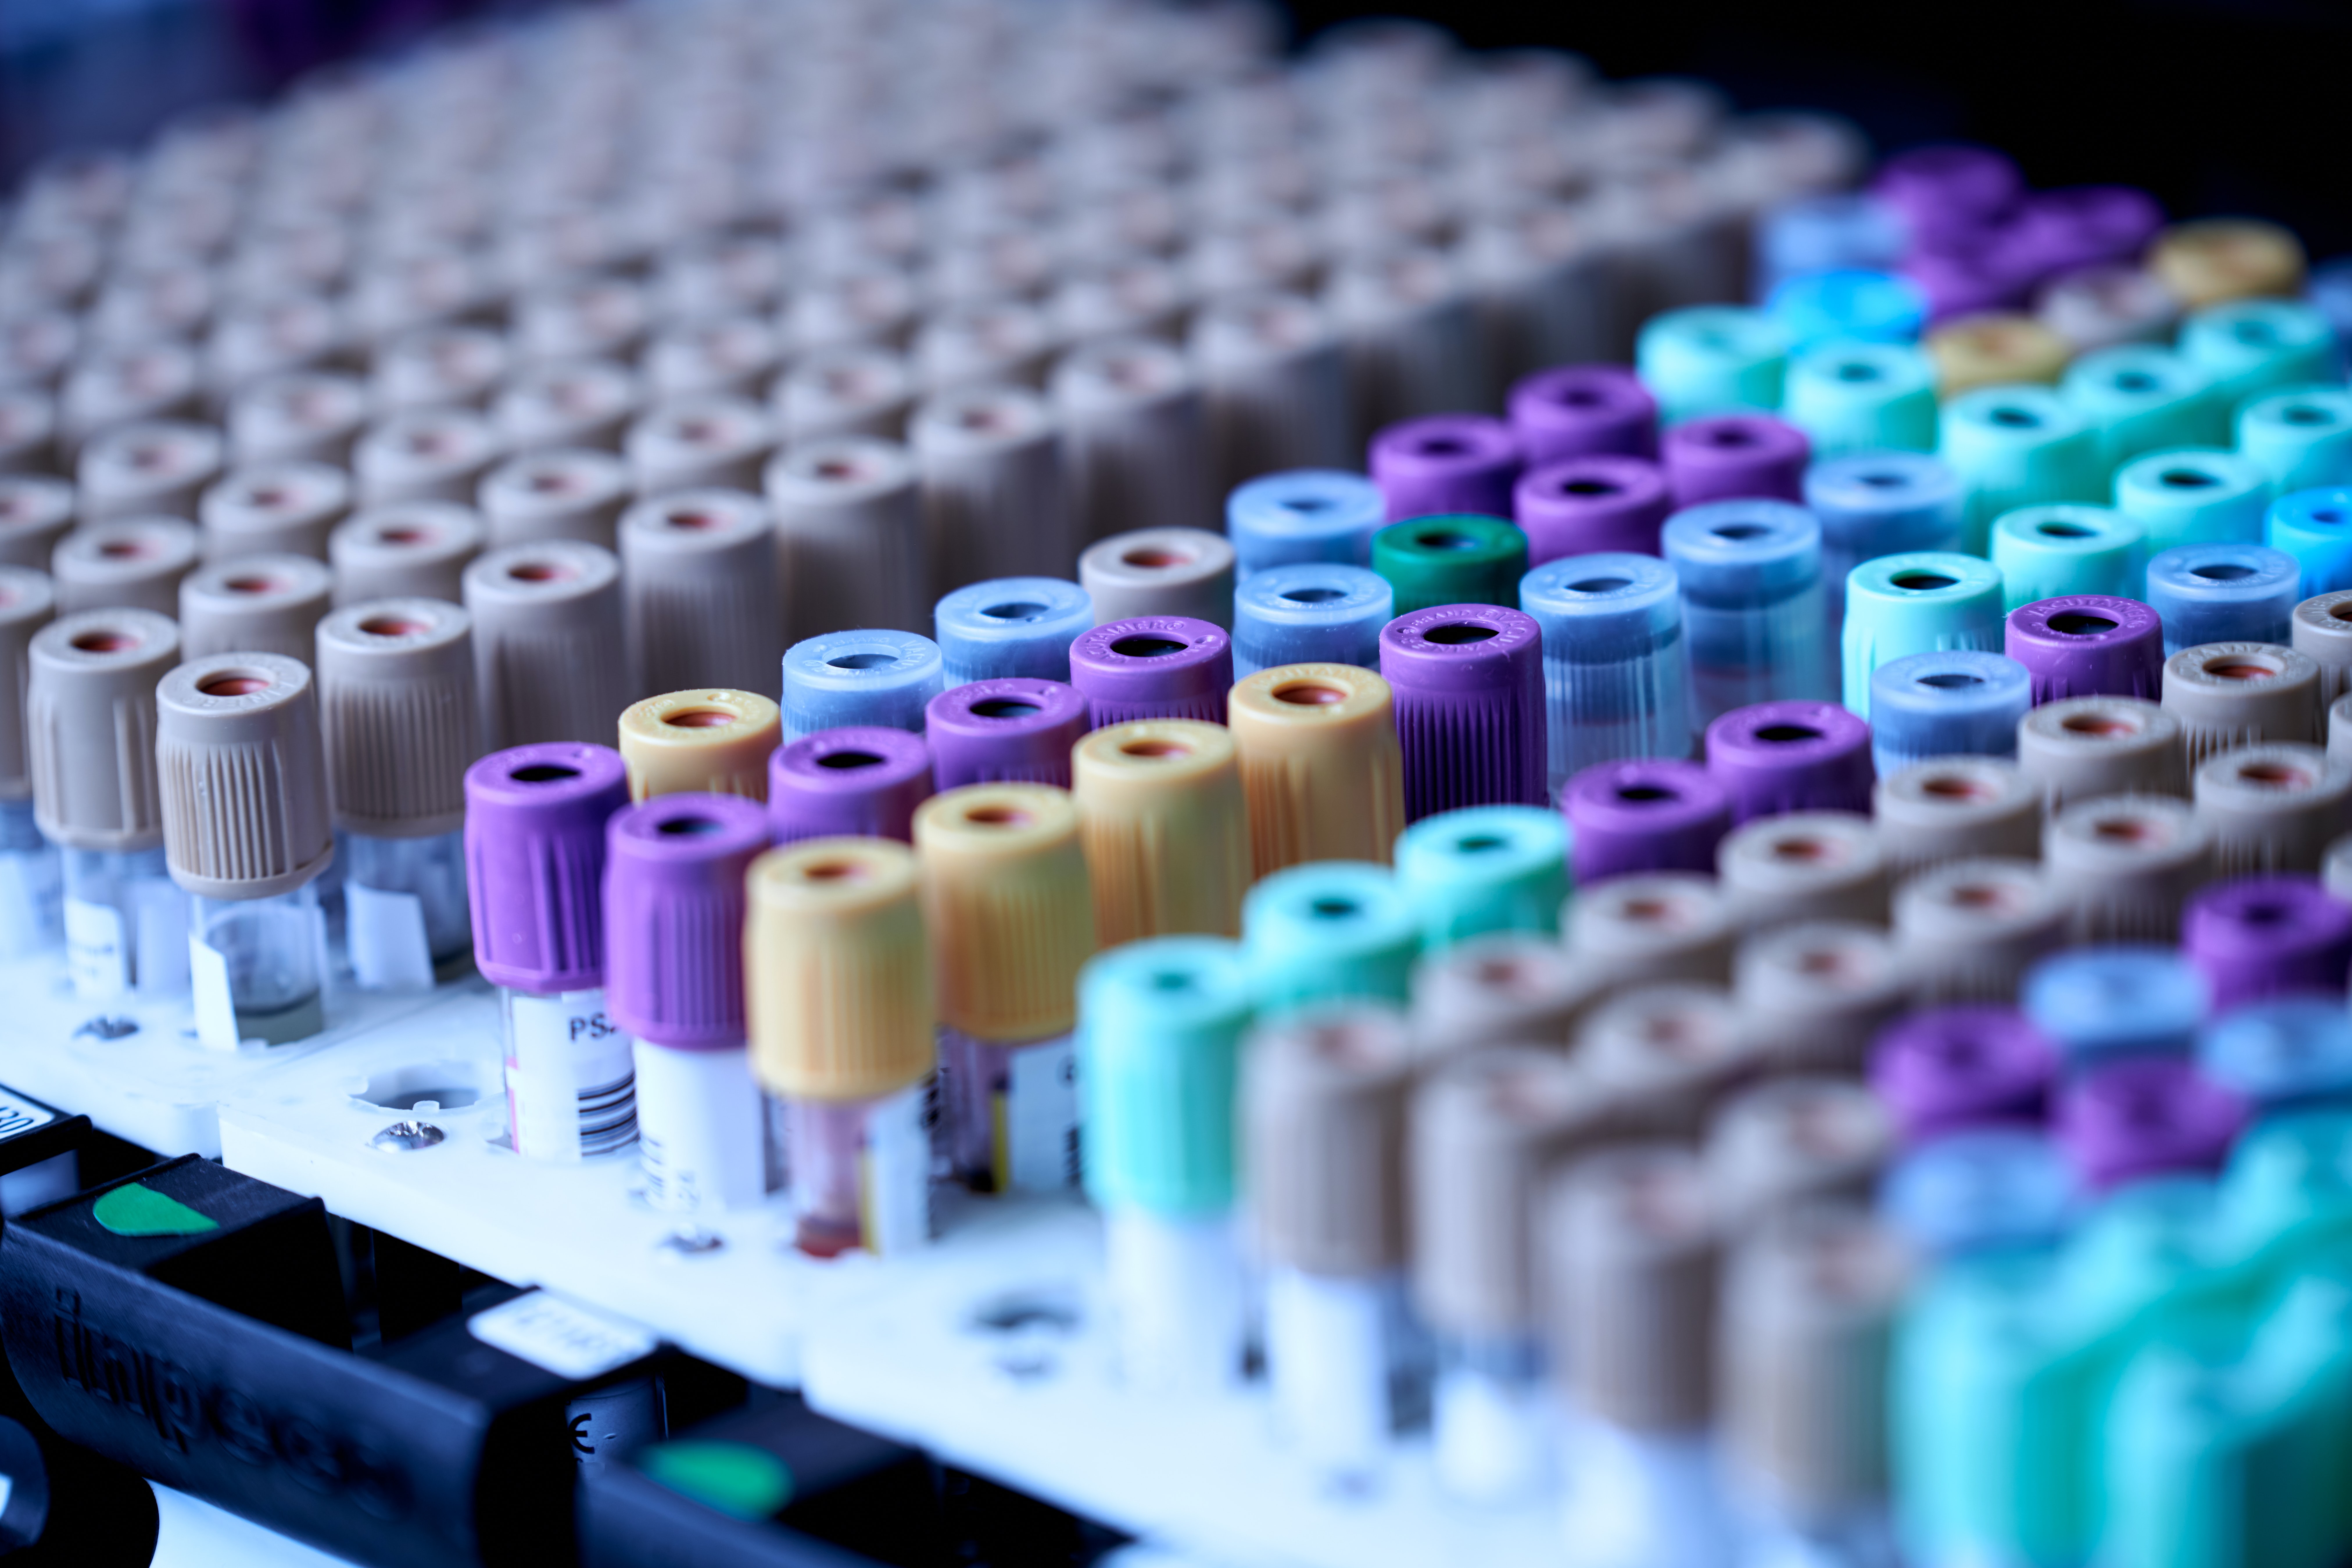 Image of a tray of test tubes